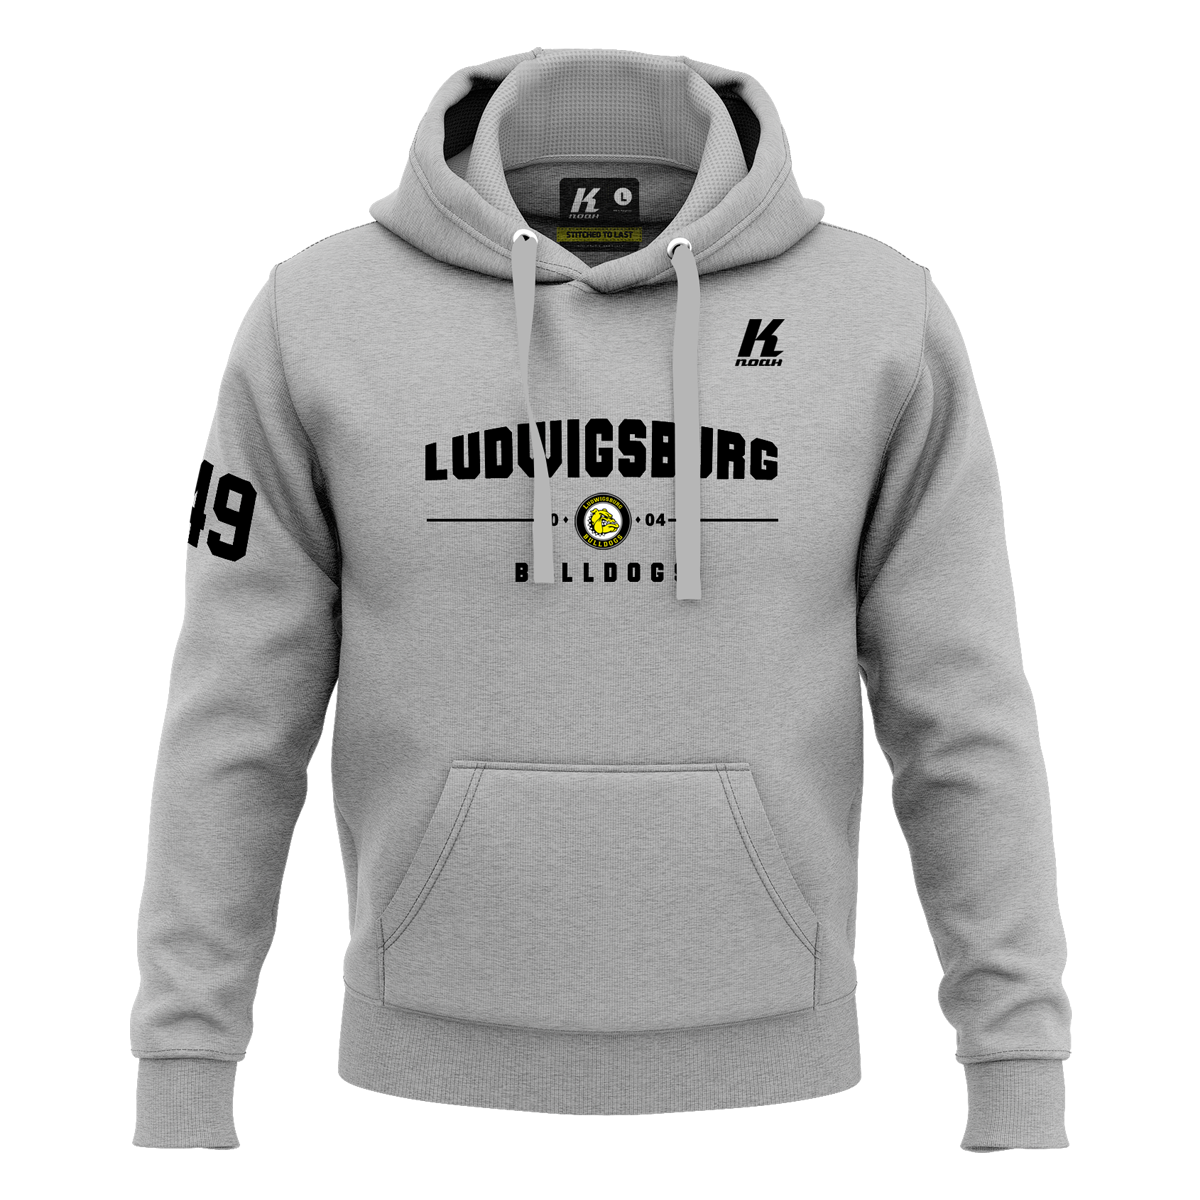 LB-Bulldogs Hoodie Basic Wordmark grey with Playernumber/Initials